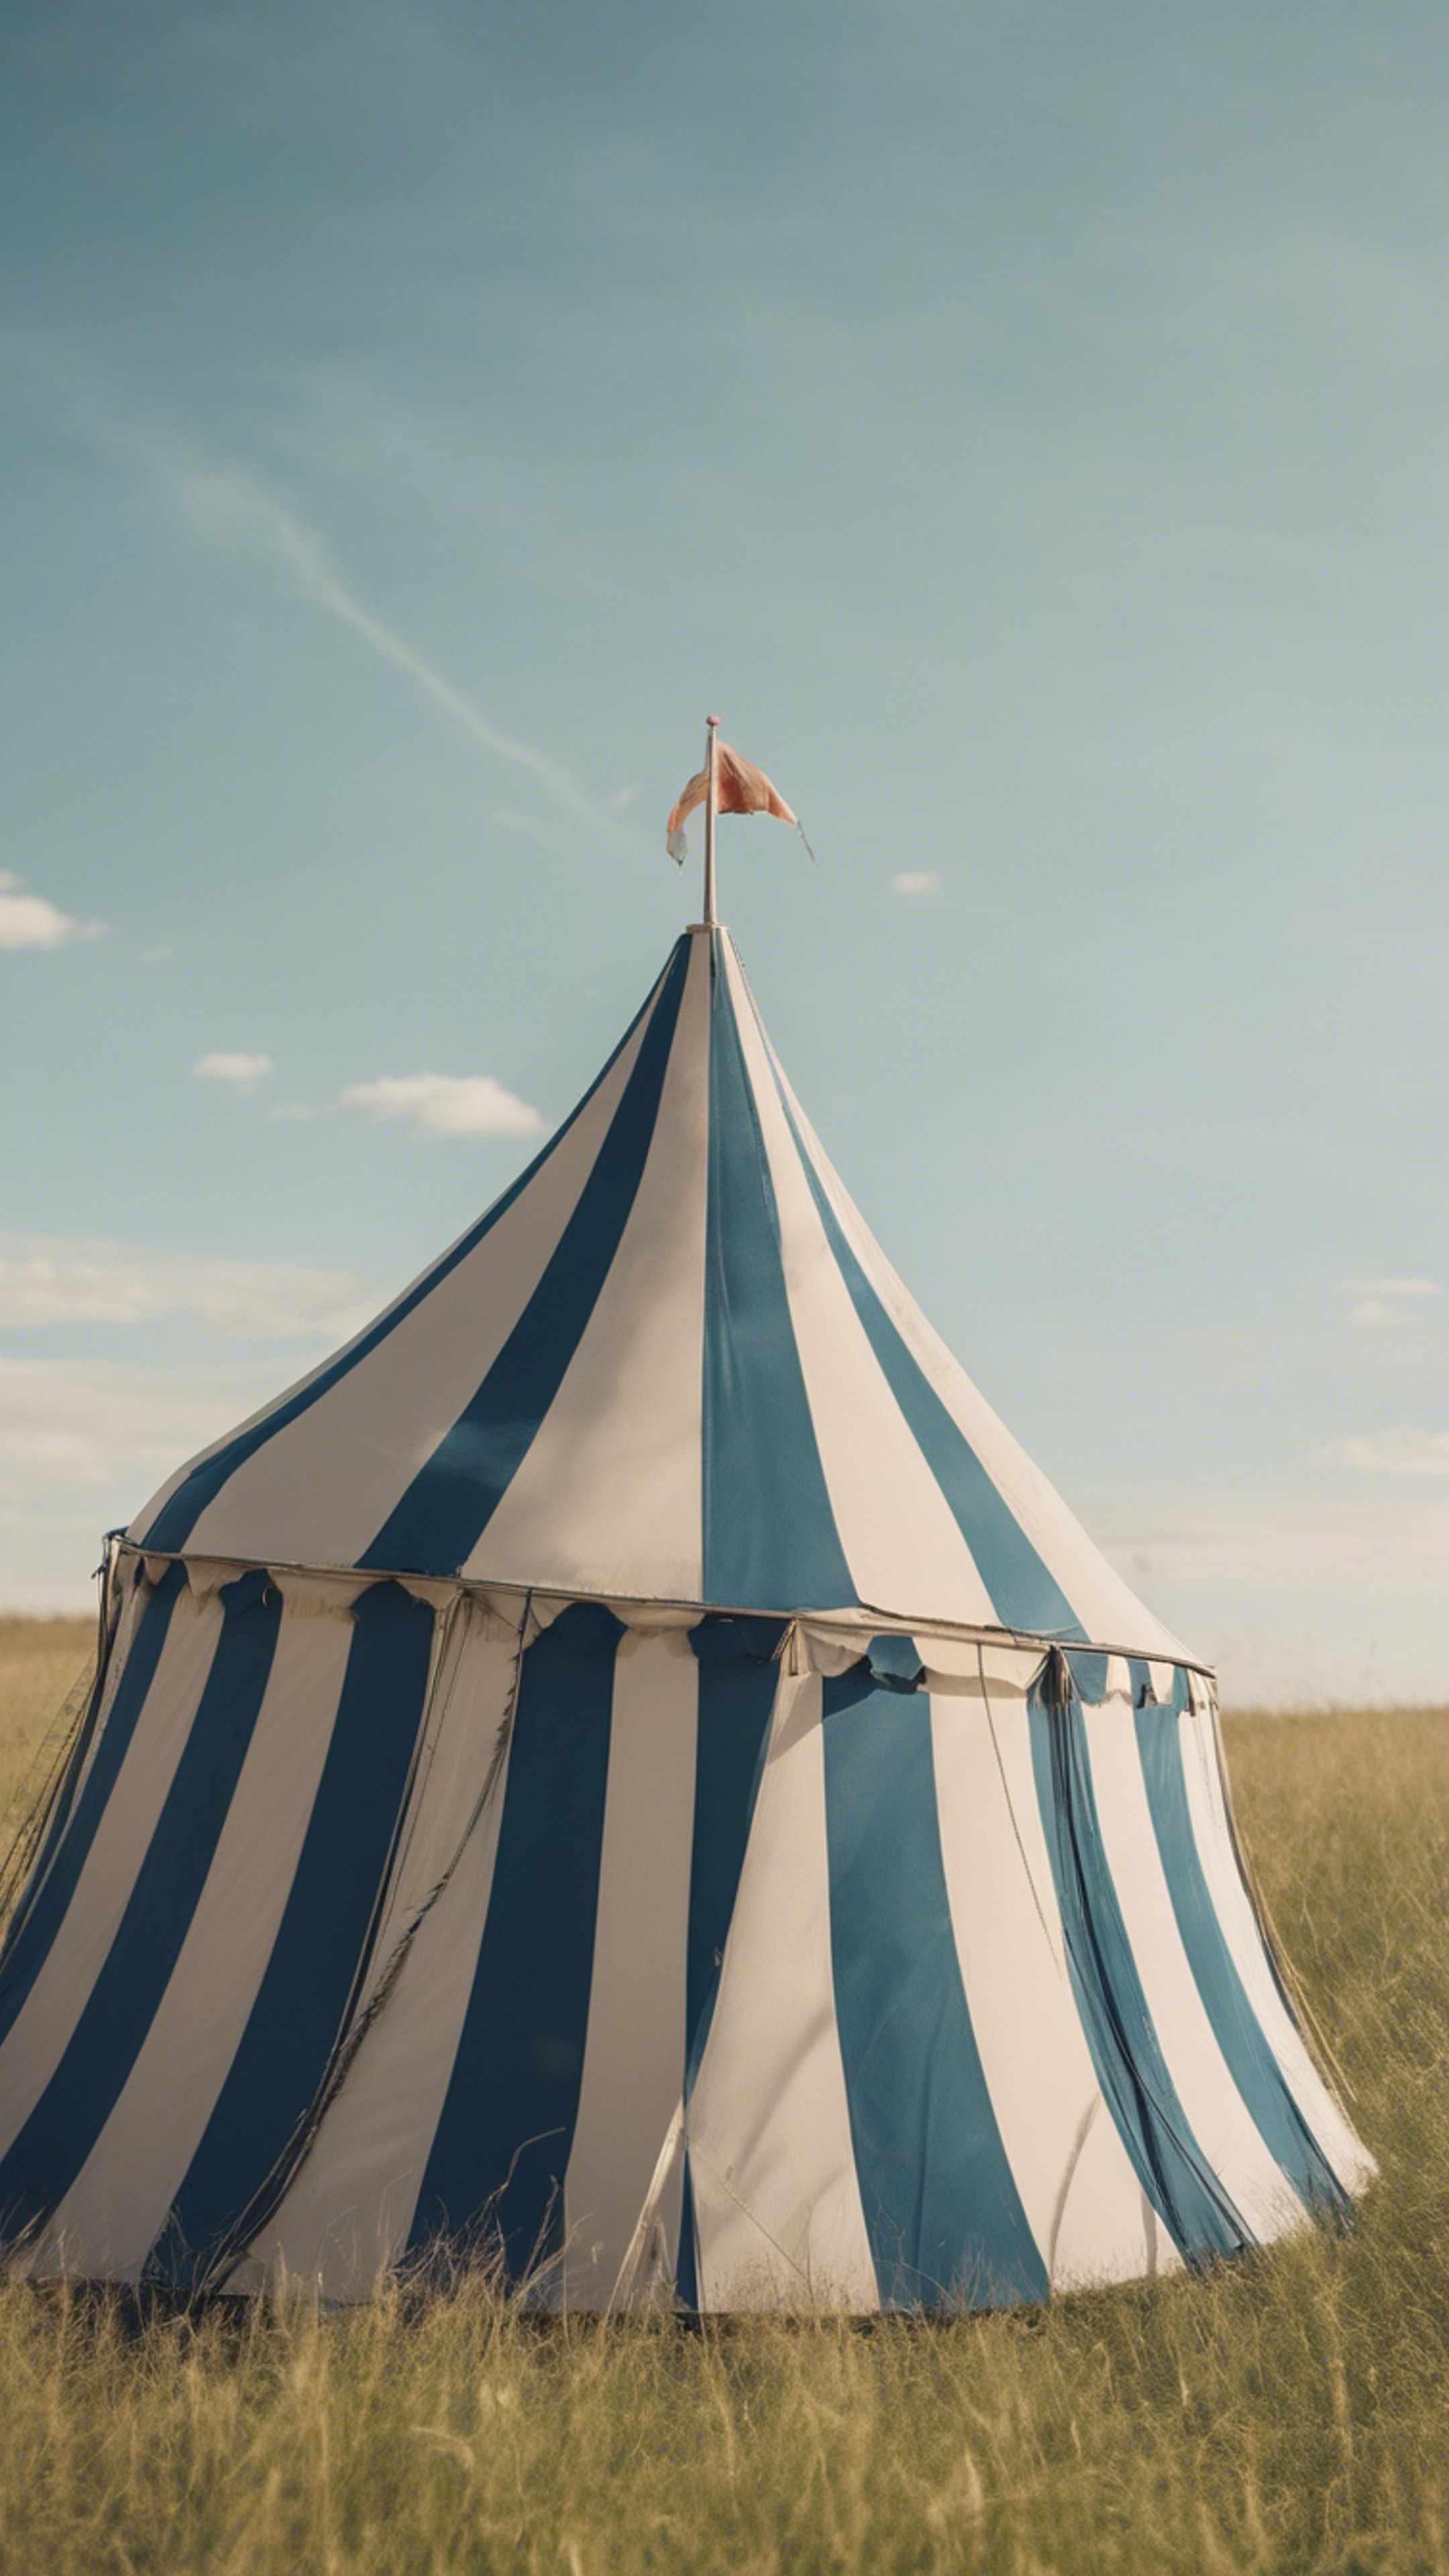 A vintage striped circus tent in a grassy field with a blue sky overhead. Tapet[07d58b74cbfe41aa8350]